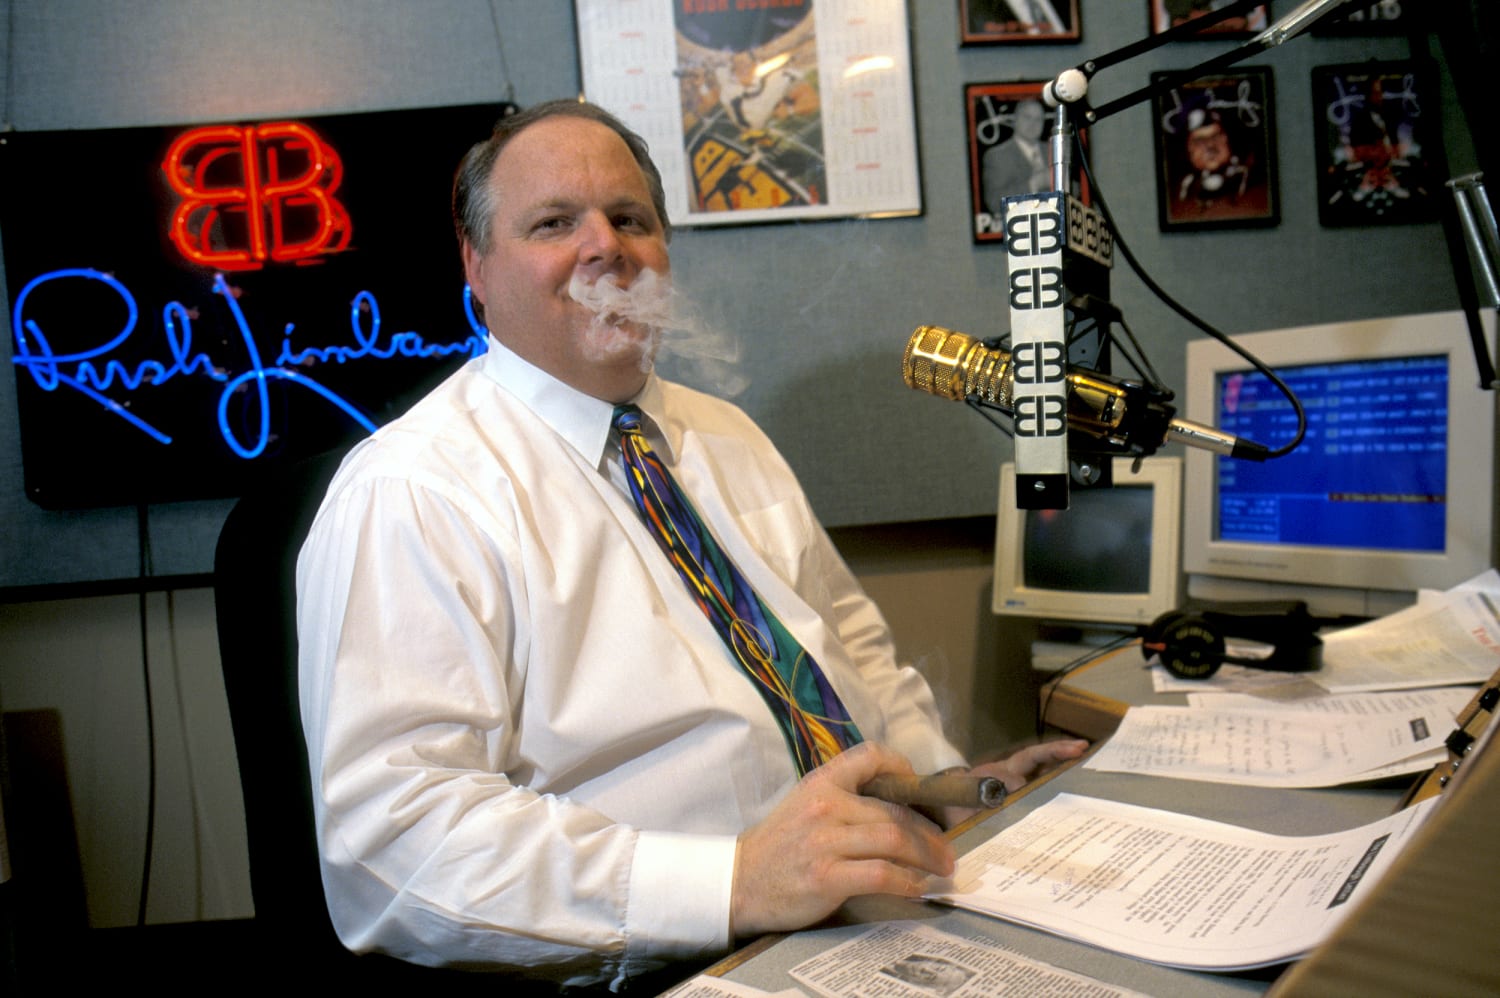 Rush Limbaugh died from lung cancer after denying smoking's risk. Why'd he believe his lie?